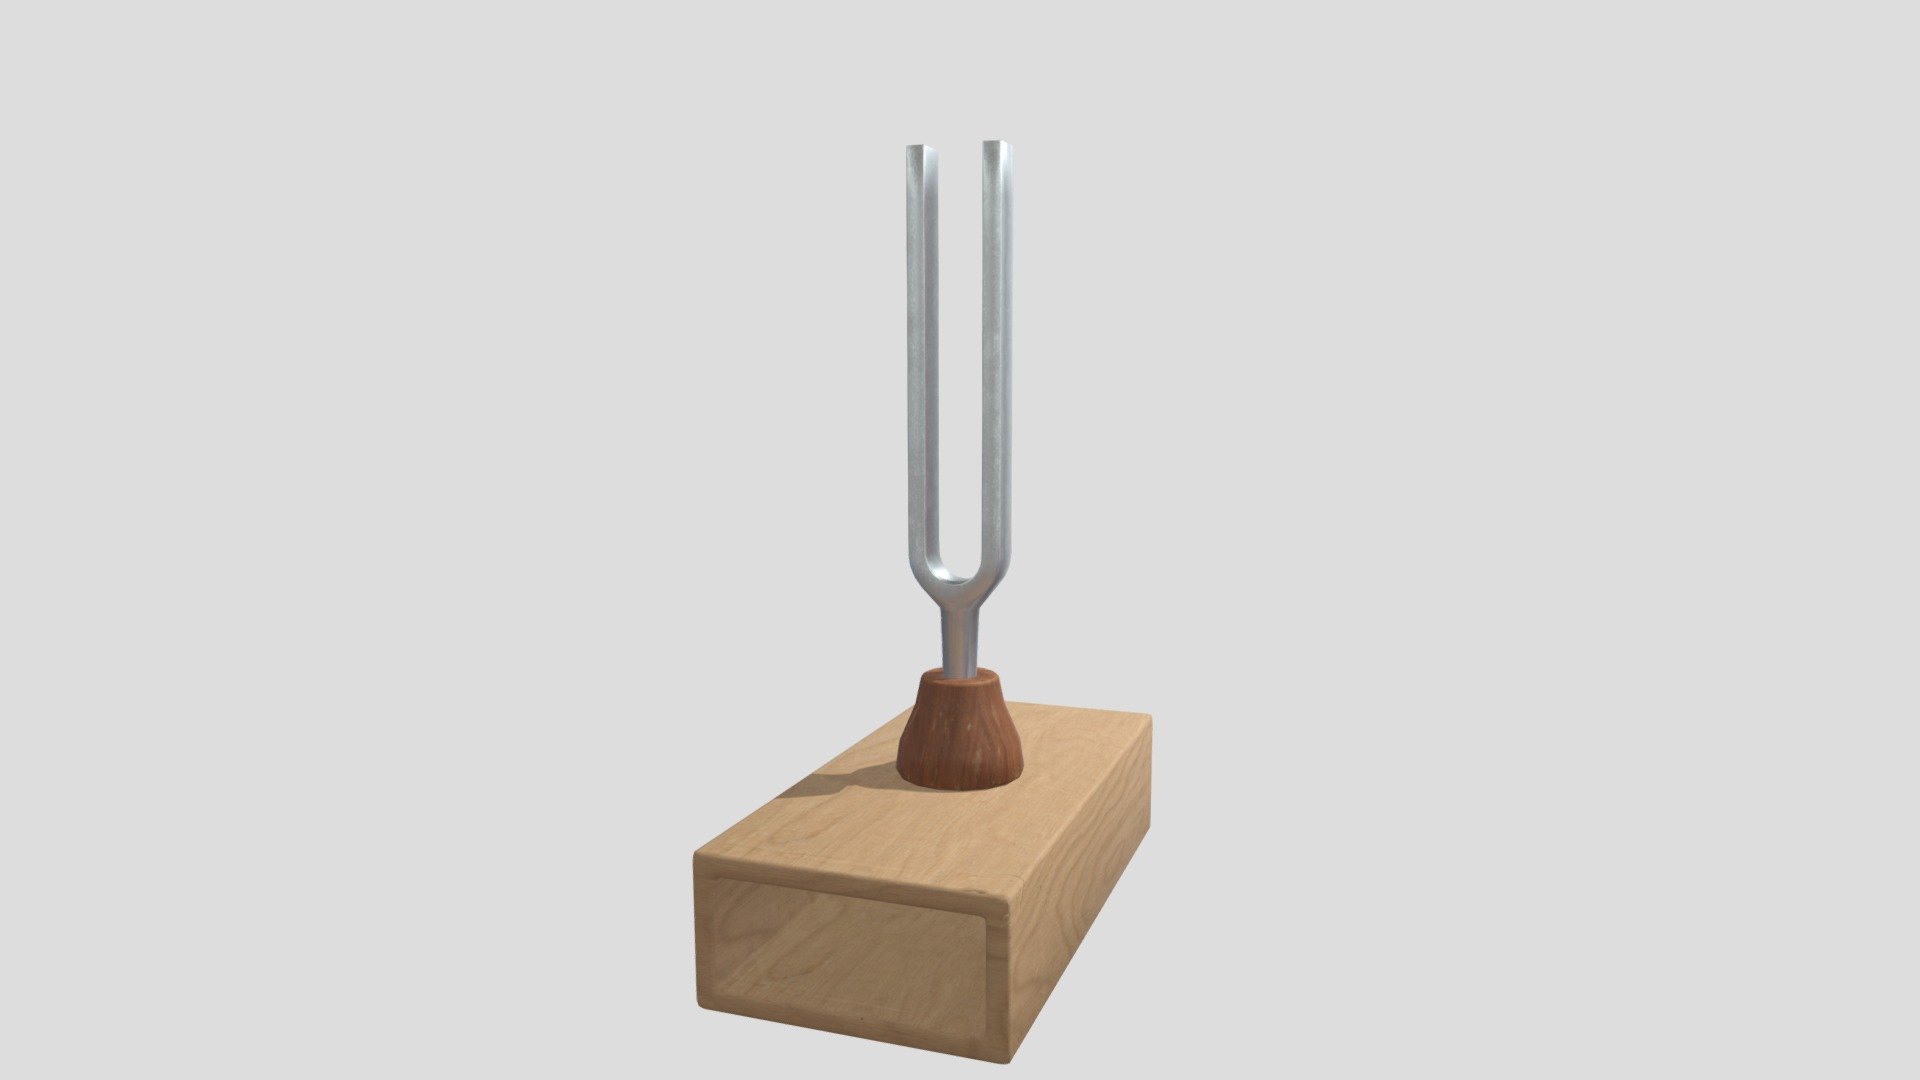 Low Poly model of 440 Hz Musical Tuning Fork with 2K textures. Initial blend file and exported .fbx model is included - Tuning Fork 440 Hz - 3D model by capkuckokos 3d model